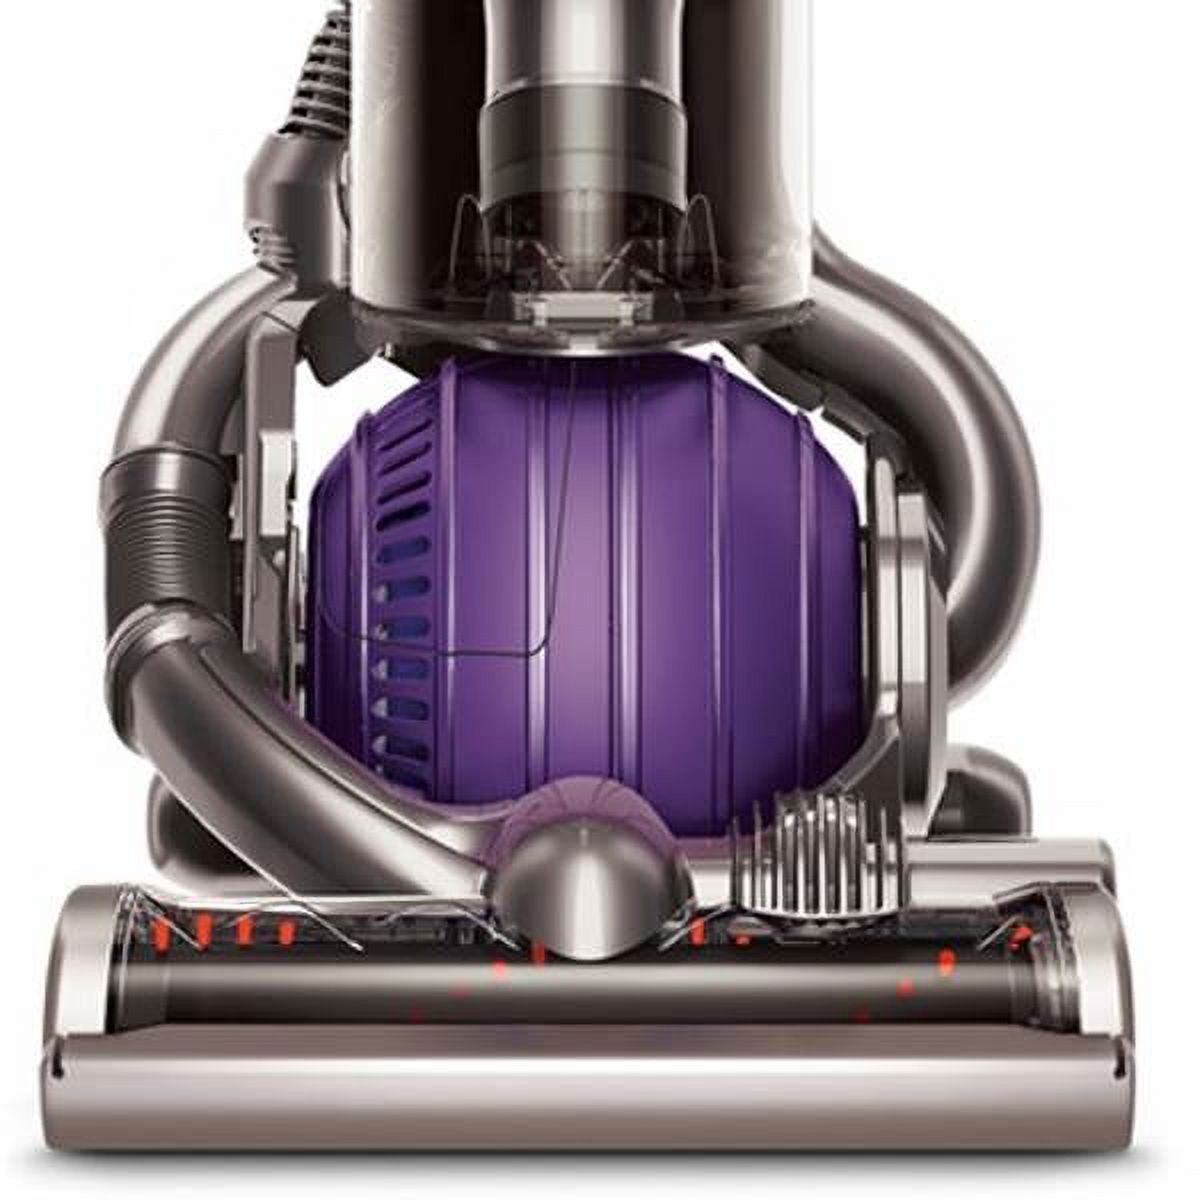 New Dyson 17418-01 DC25 The Ball Animal All-Floor Upright Bagless Vacuum Cleaner - image 3 of 12